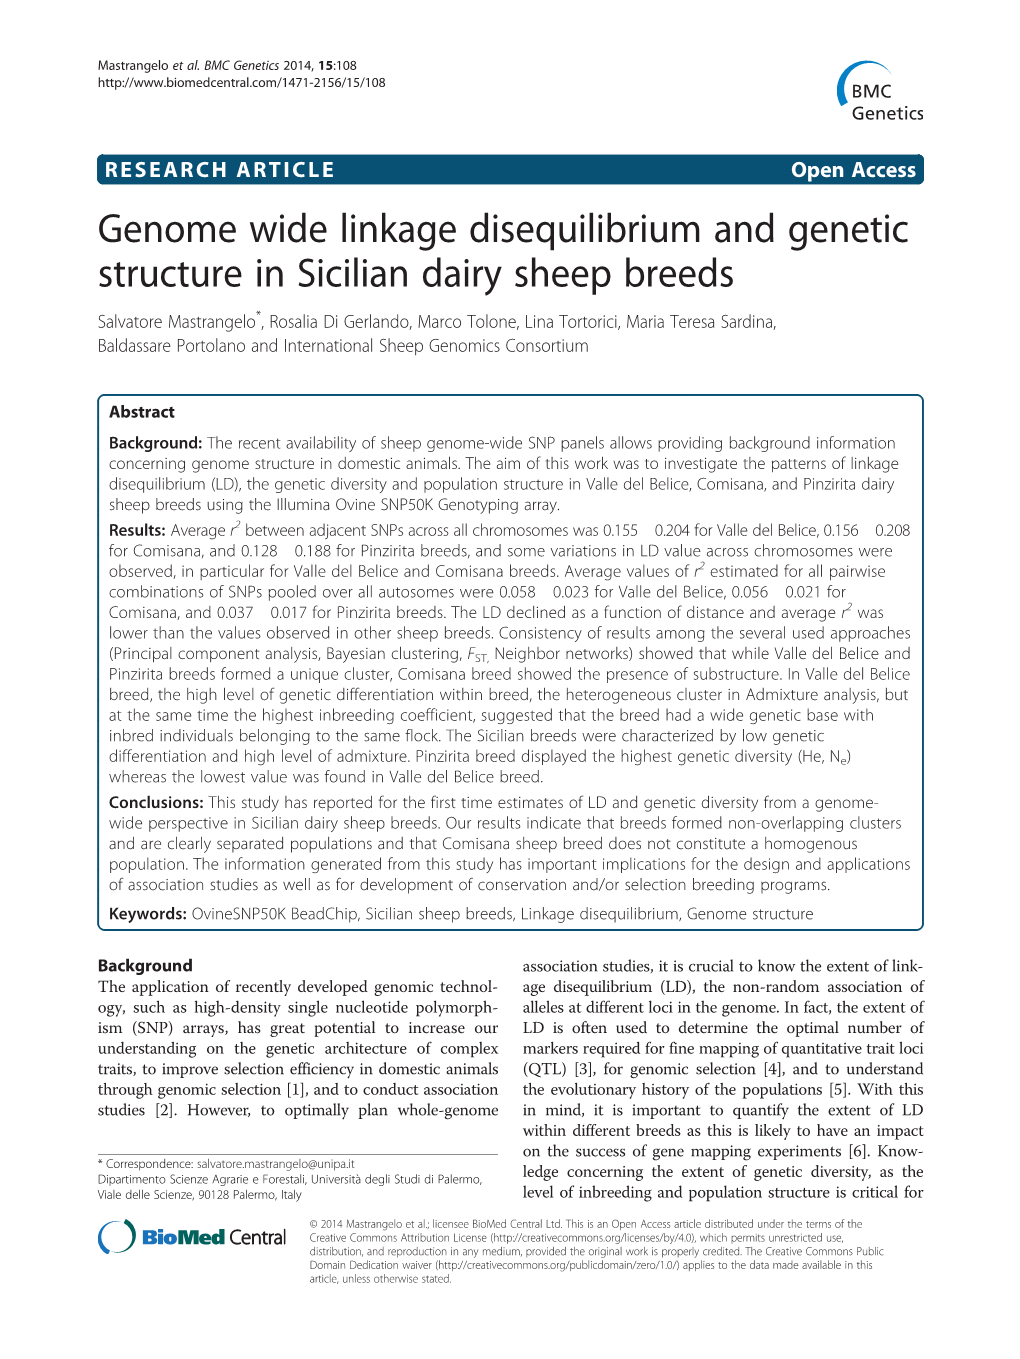 Genome Wide Linkage Disequilibrium and Genetic Structure in Sicilian